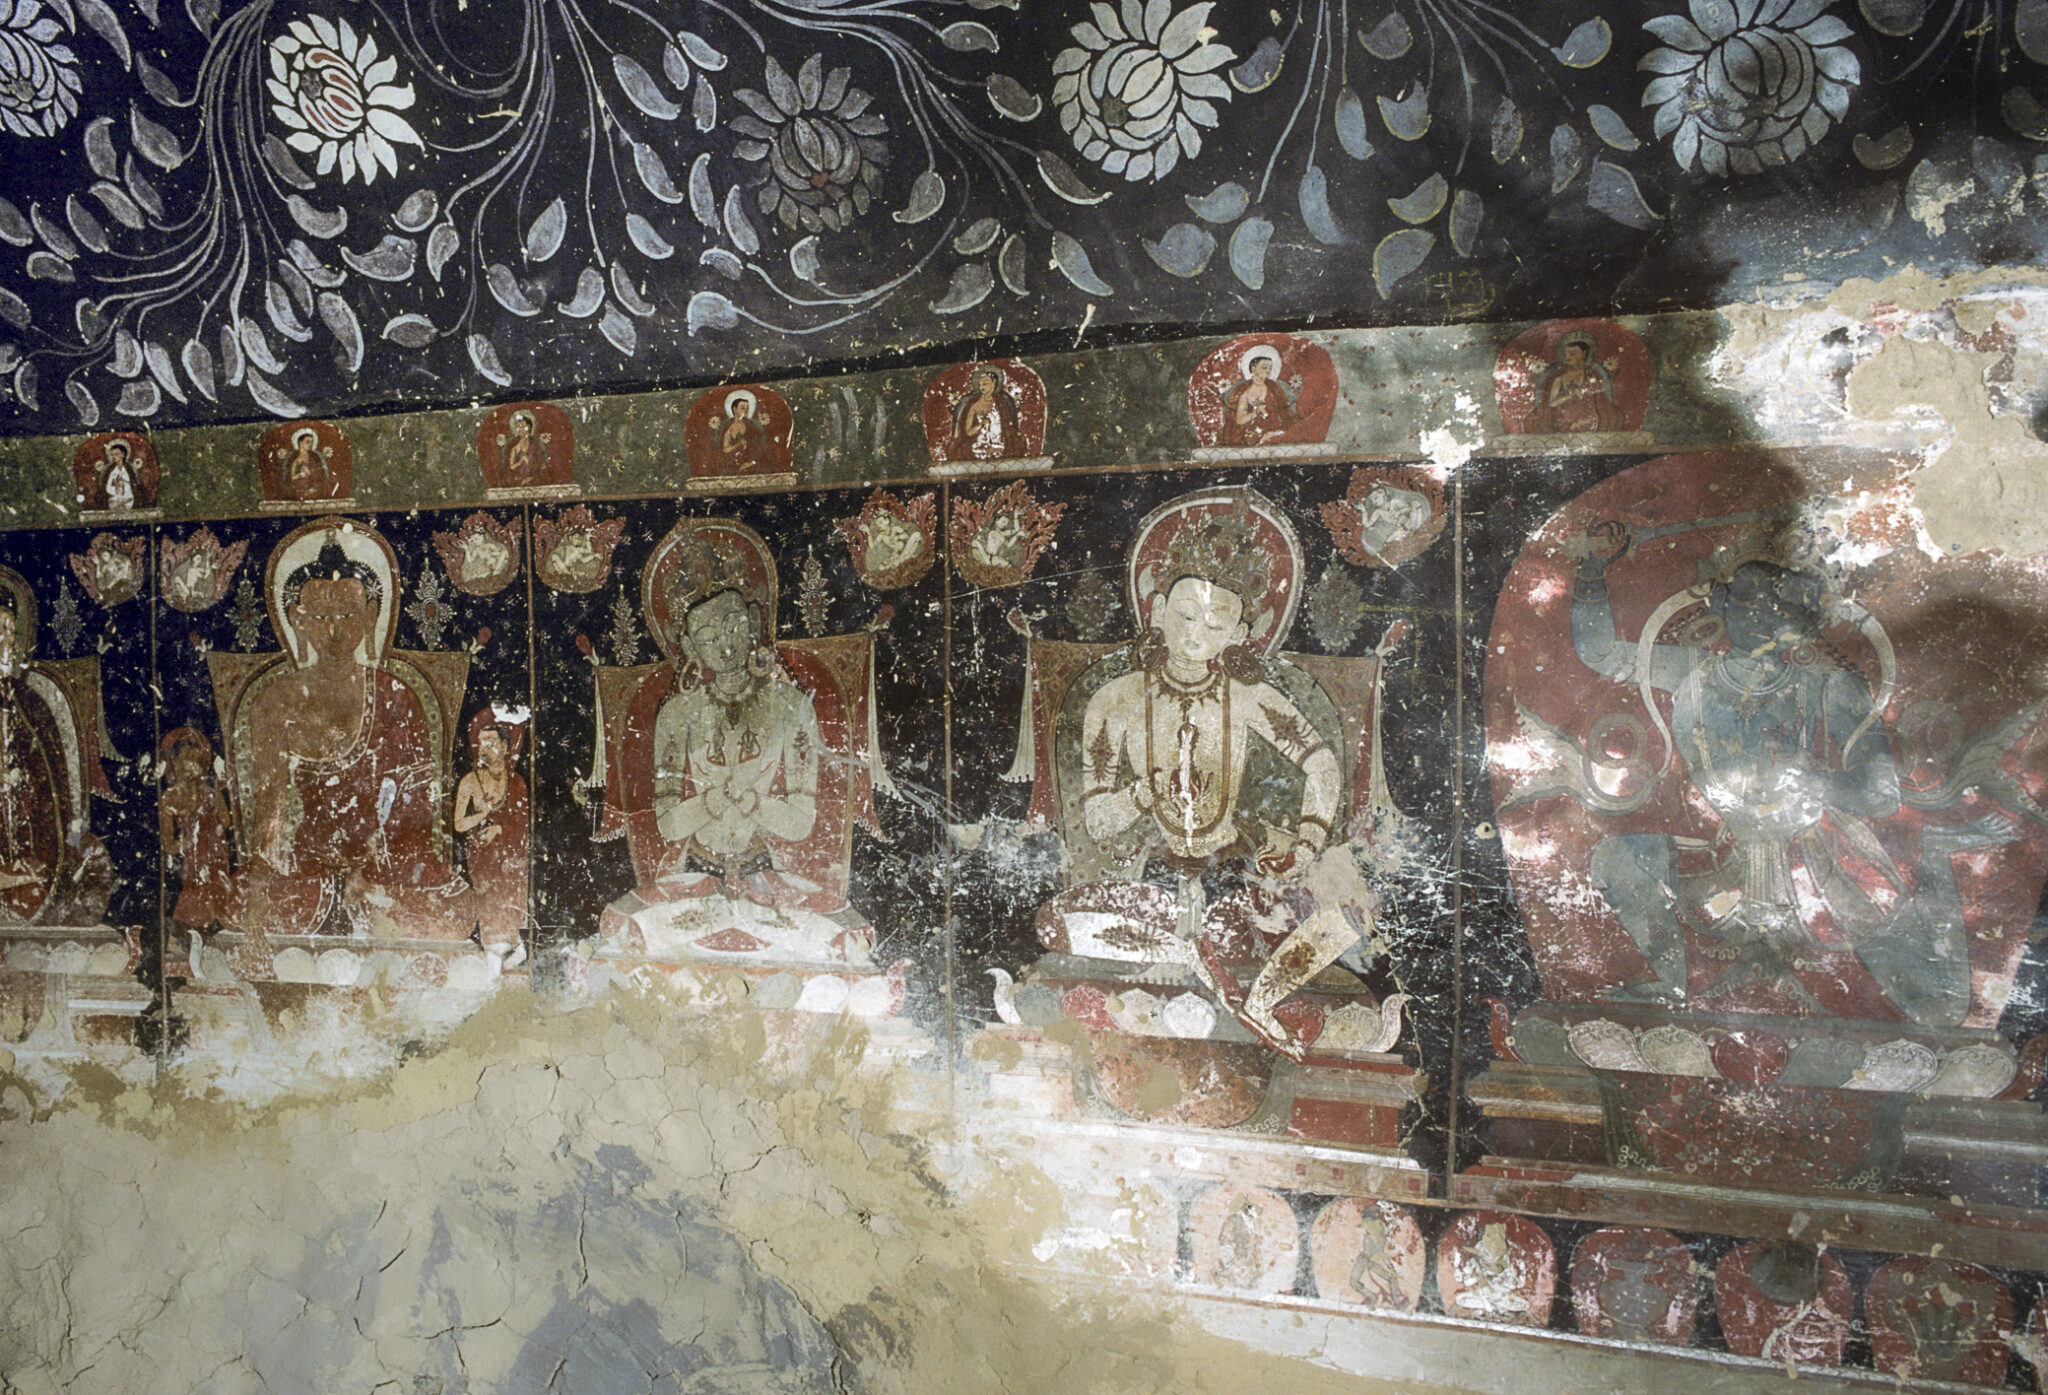 Register of deity portraits below floral motif; heavy damage to bottom left section of mural